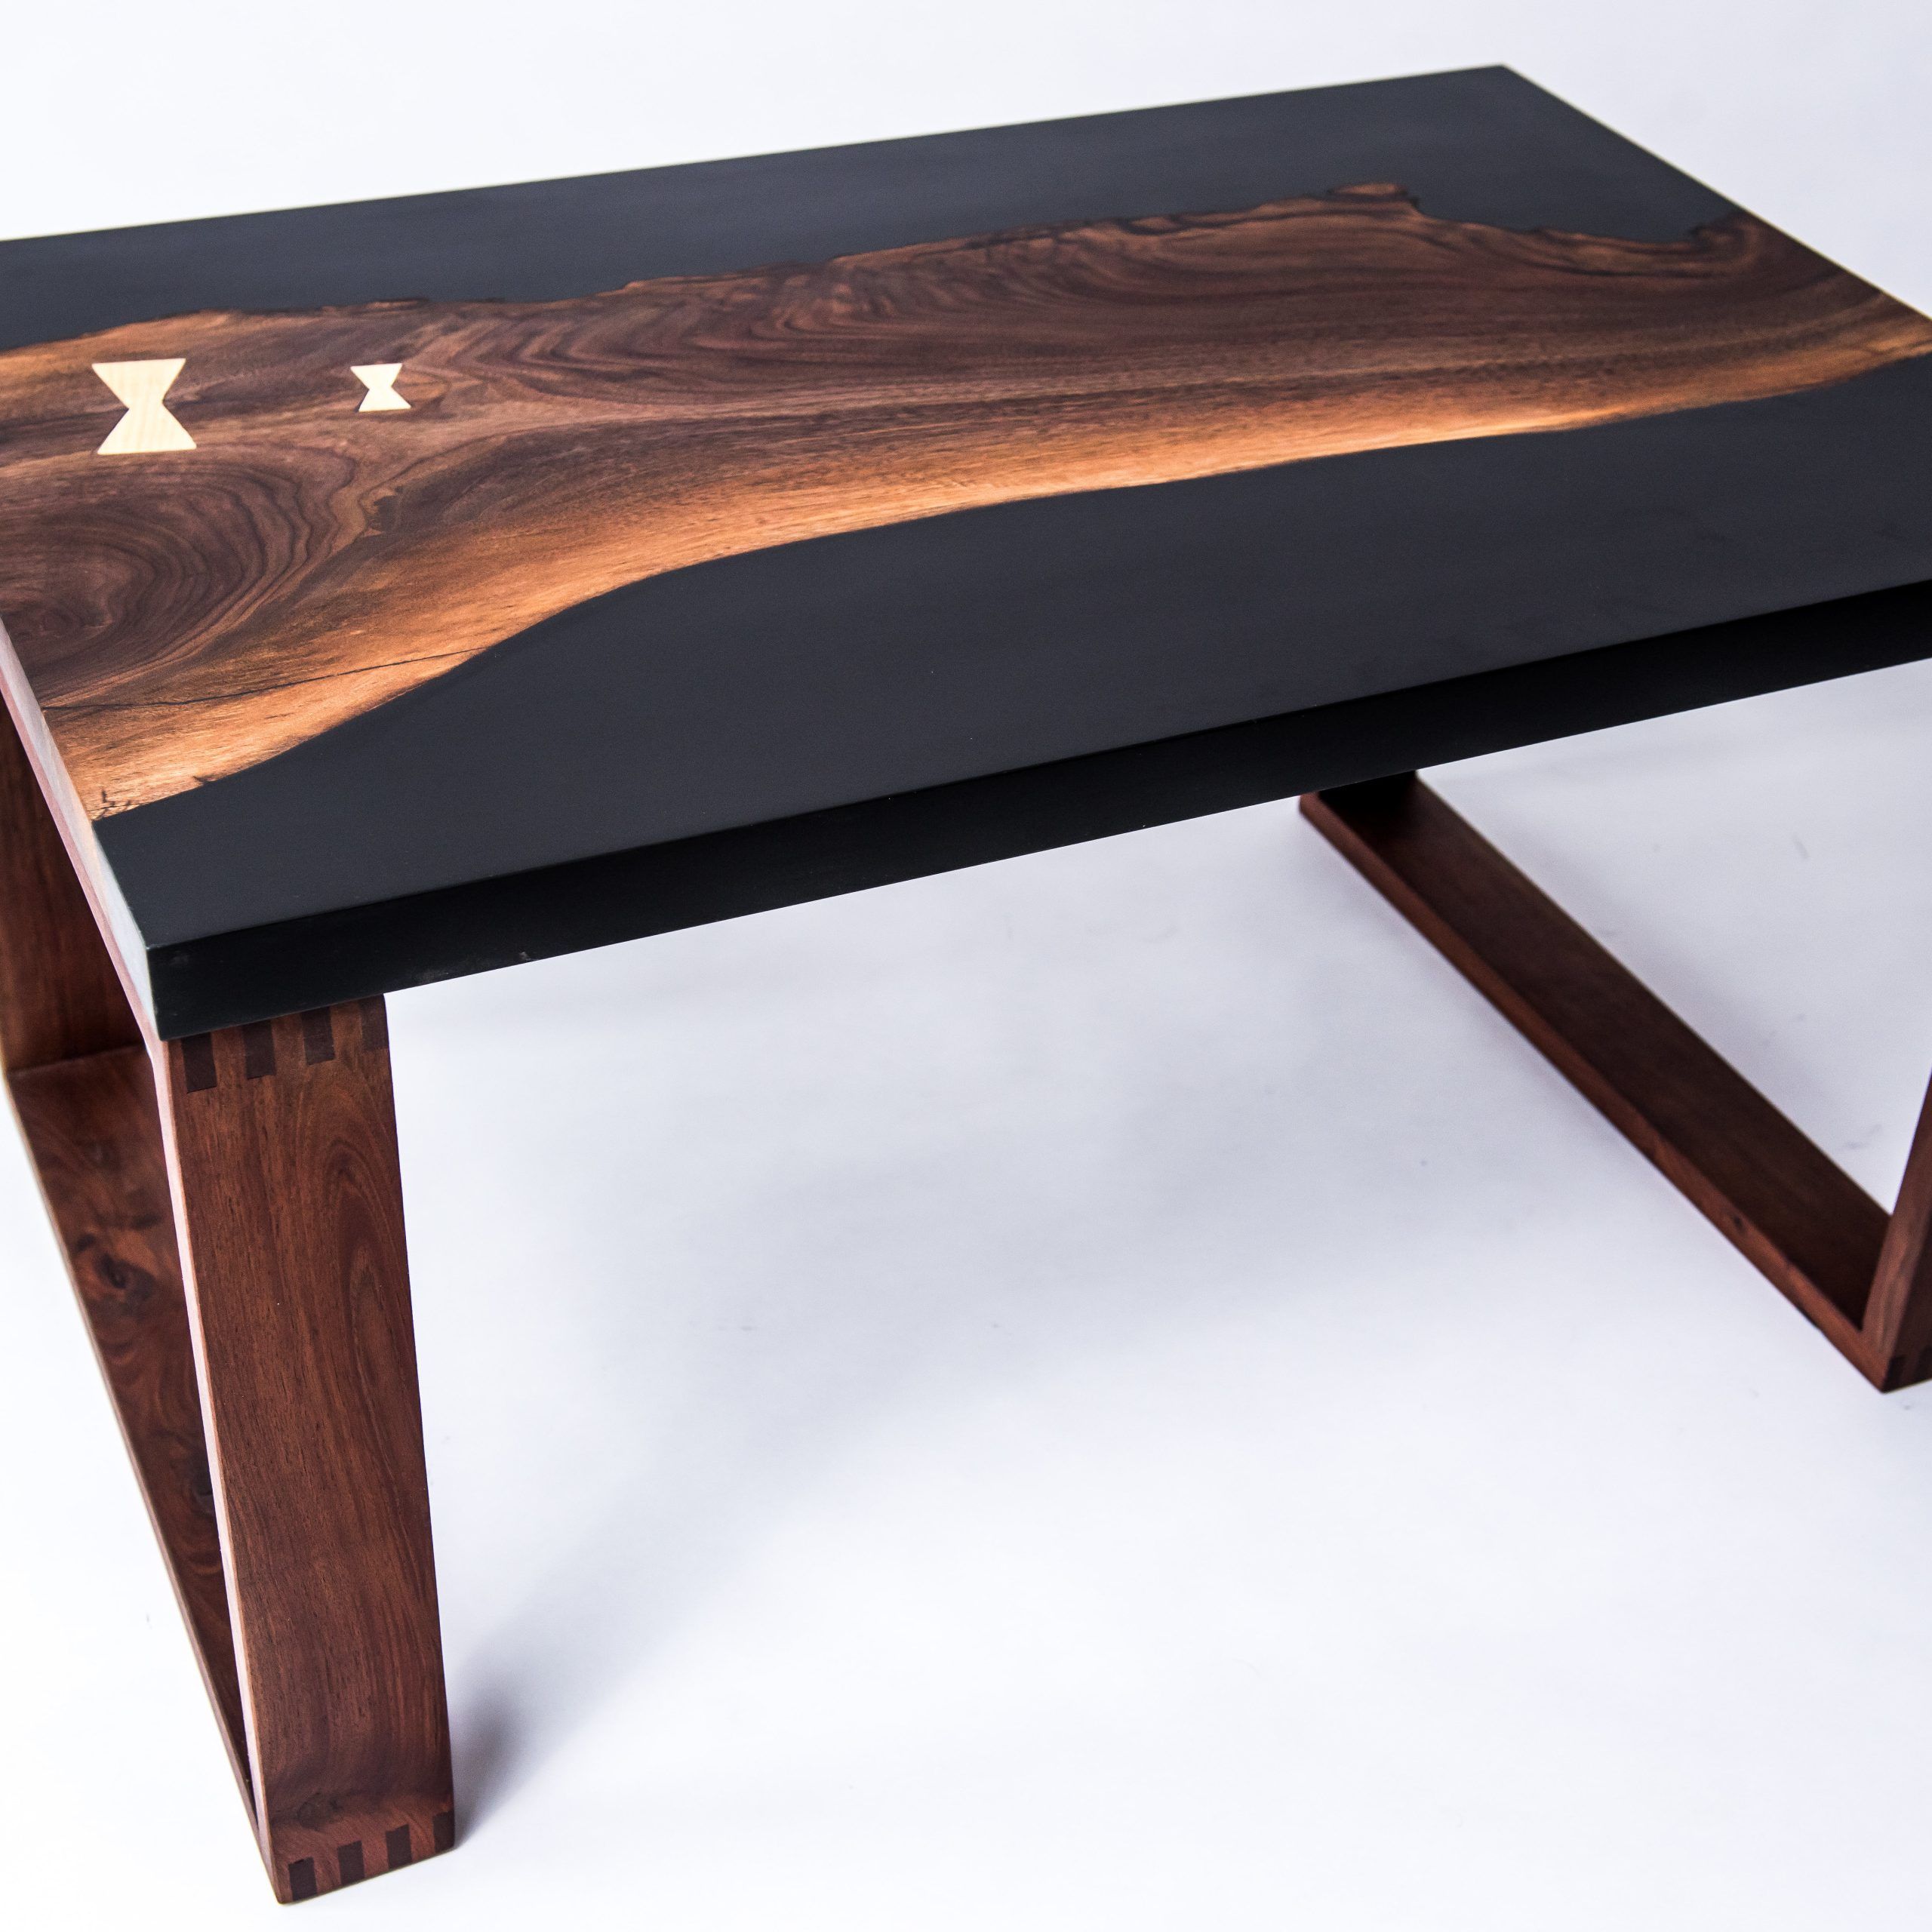 Walnut Coffee Tables Inside Most Current Black Walnut Resin Cast Coffee Table (View 1 of 10)